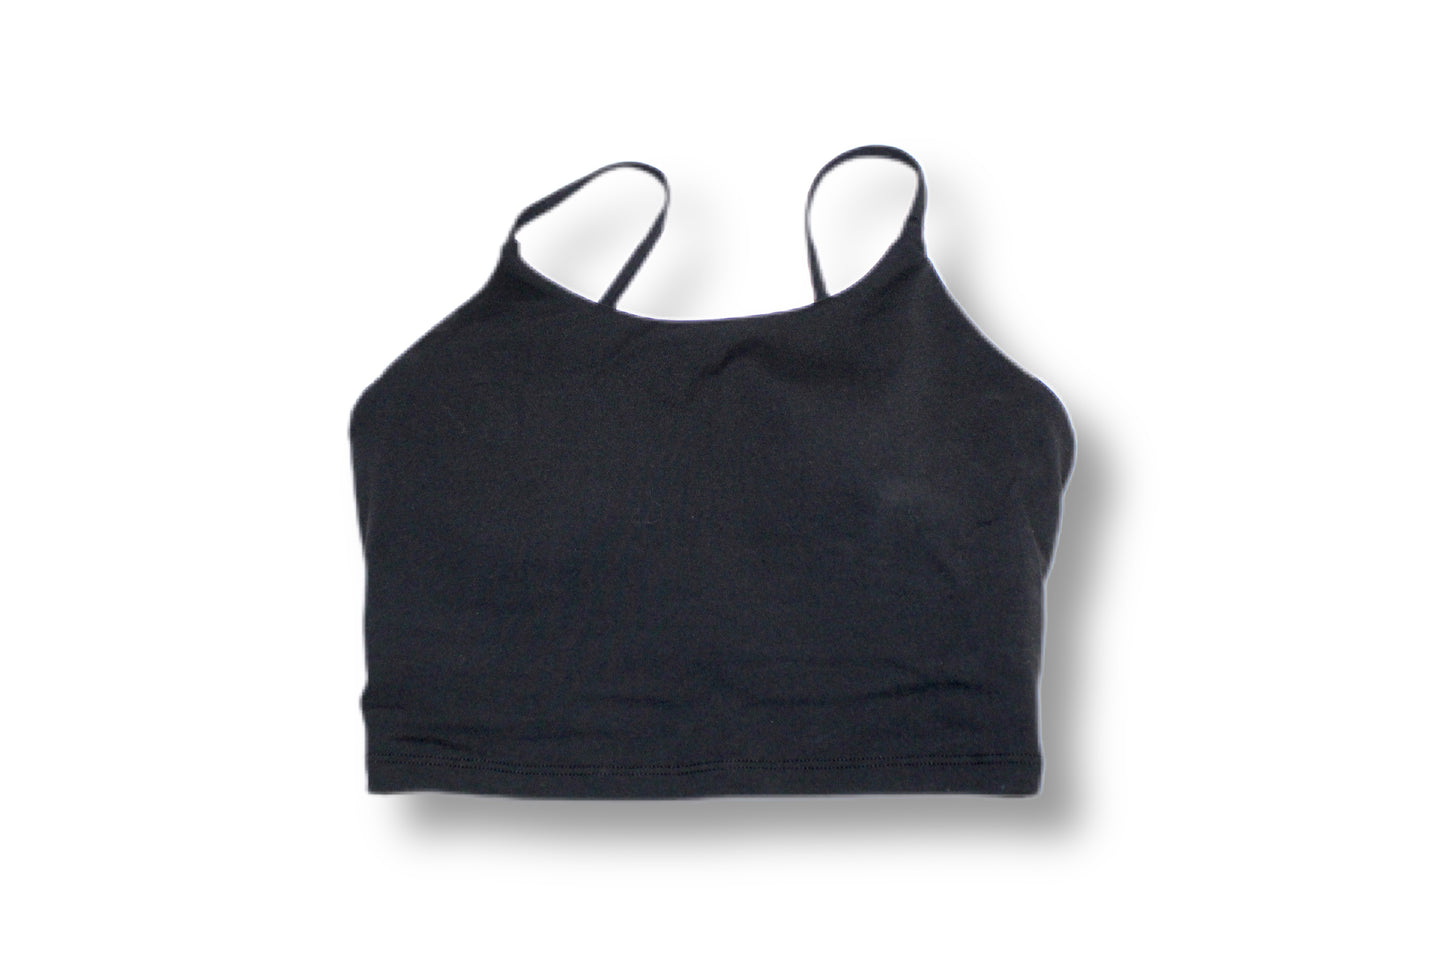 Plain black spaghetti strap crop top with built in bra. Perfect for hiking outfits, camping outfits, and all things travel. 